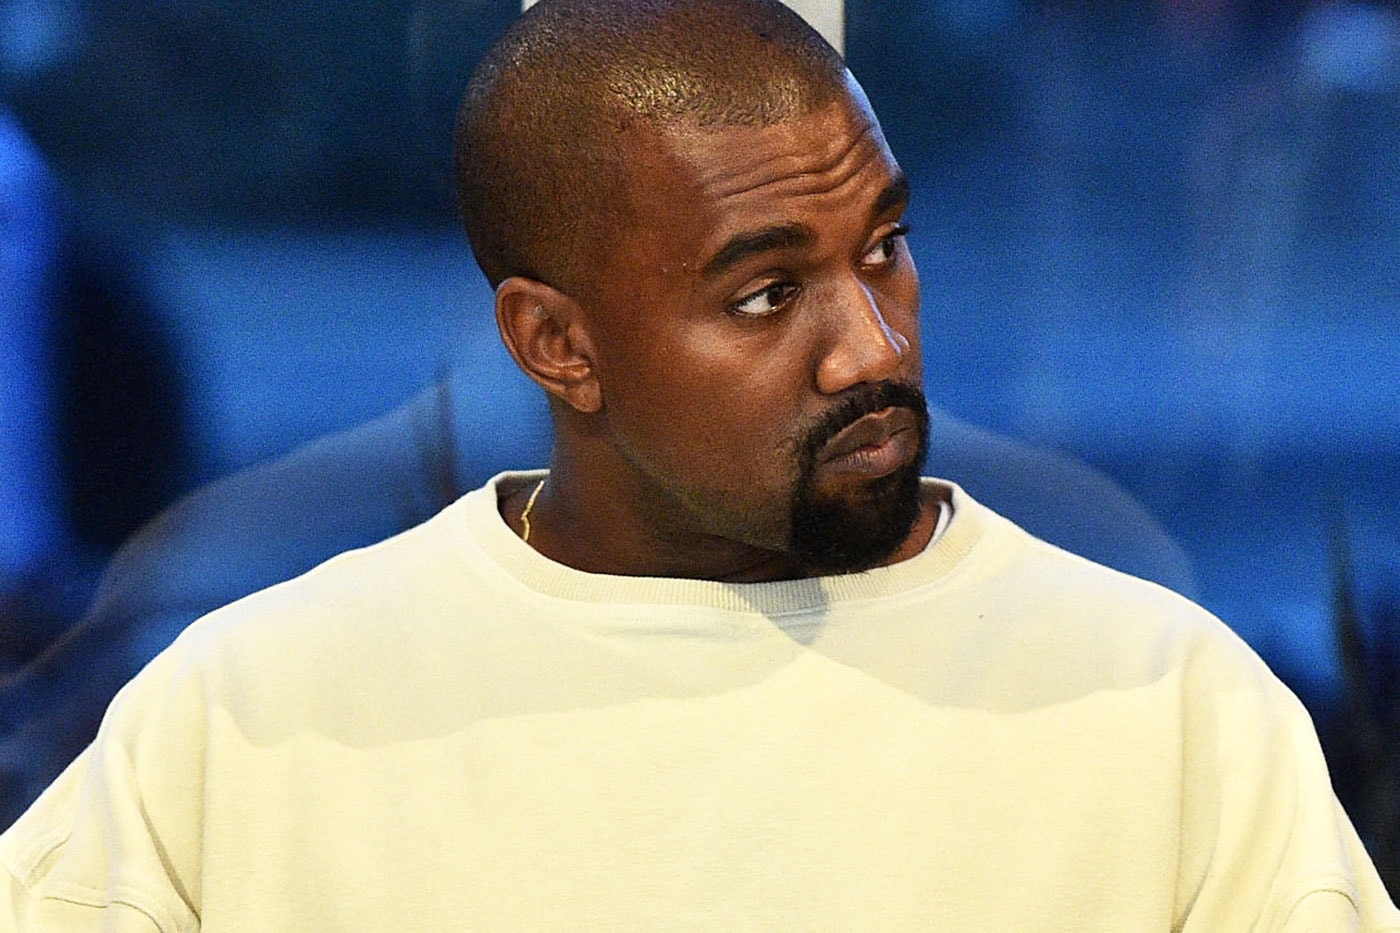 Kanye West Doesn't Like In-App Purchases in Children Games